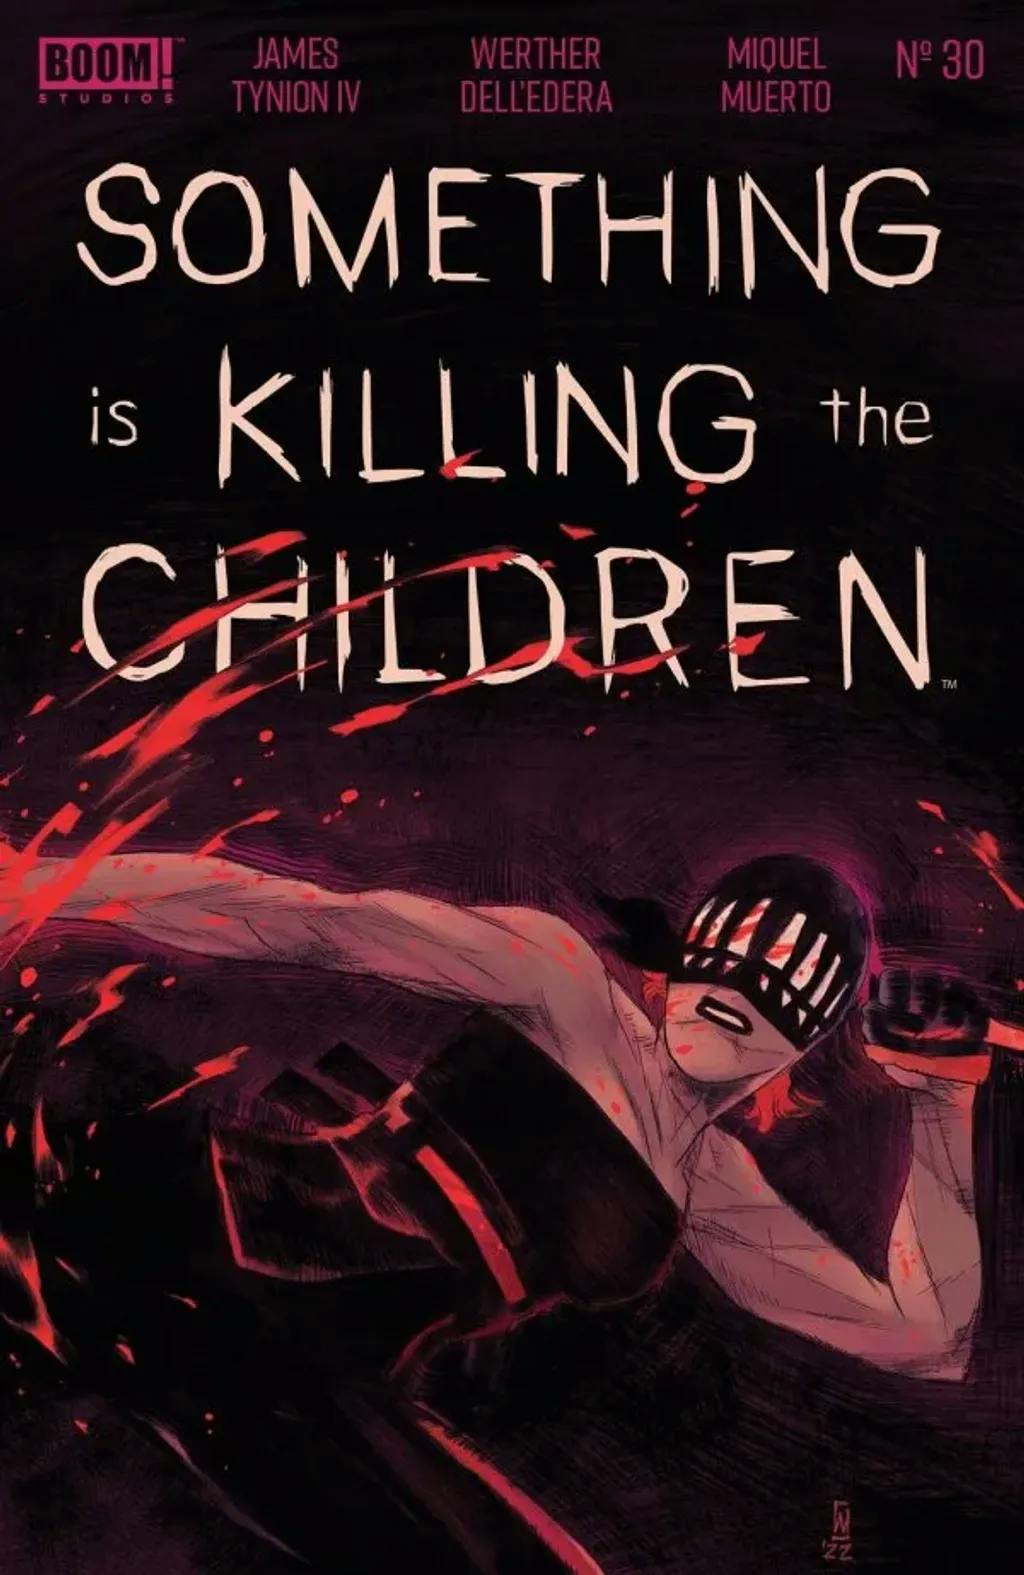 Something is Killing the Children #30 by James Tynioon IV, Werther Dell'Edera, and Miquel Muerto